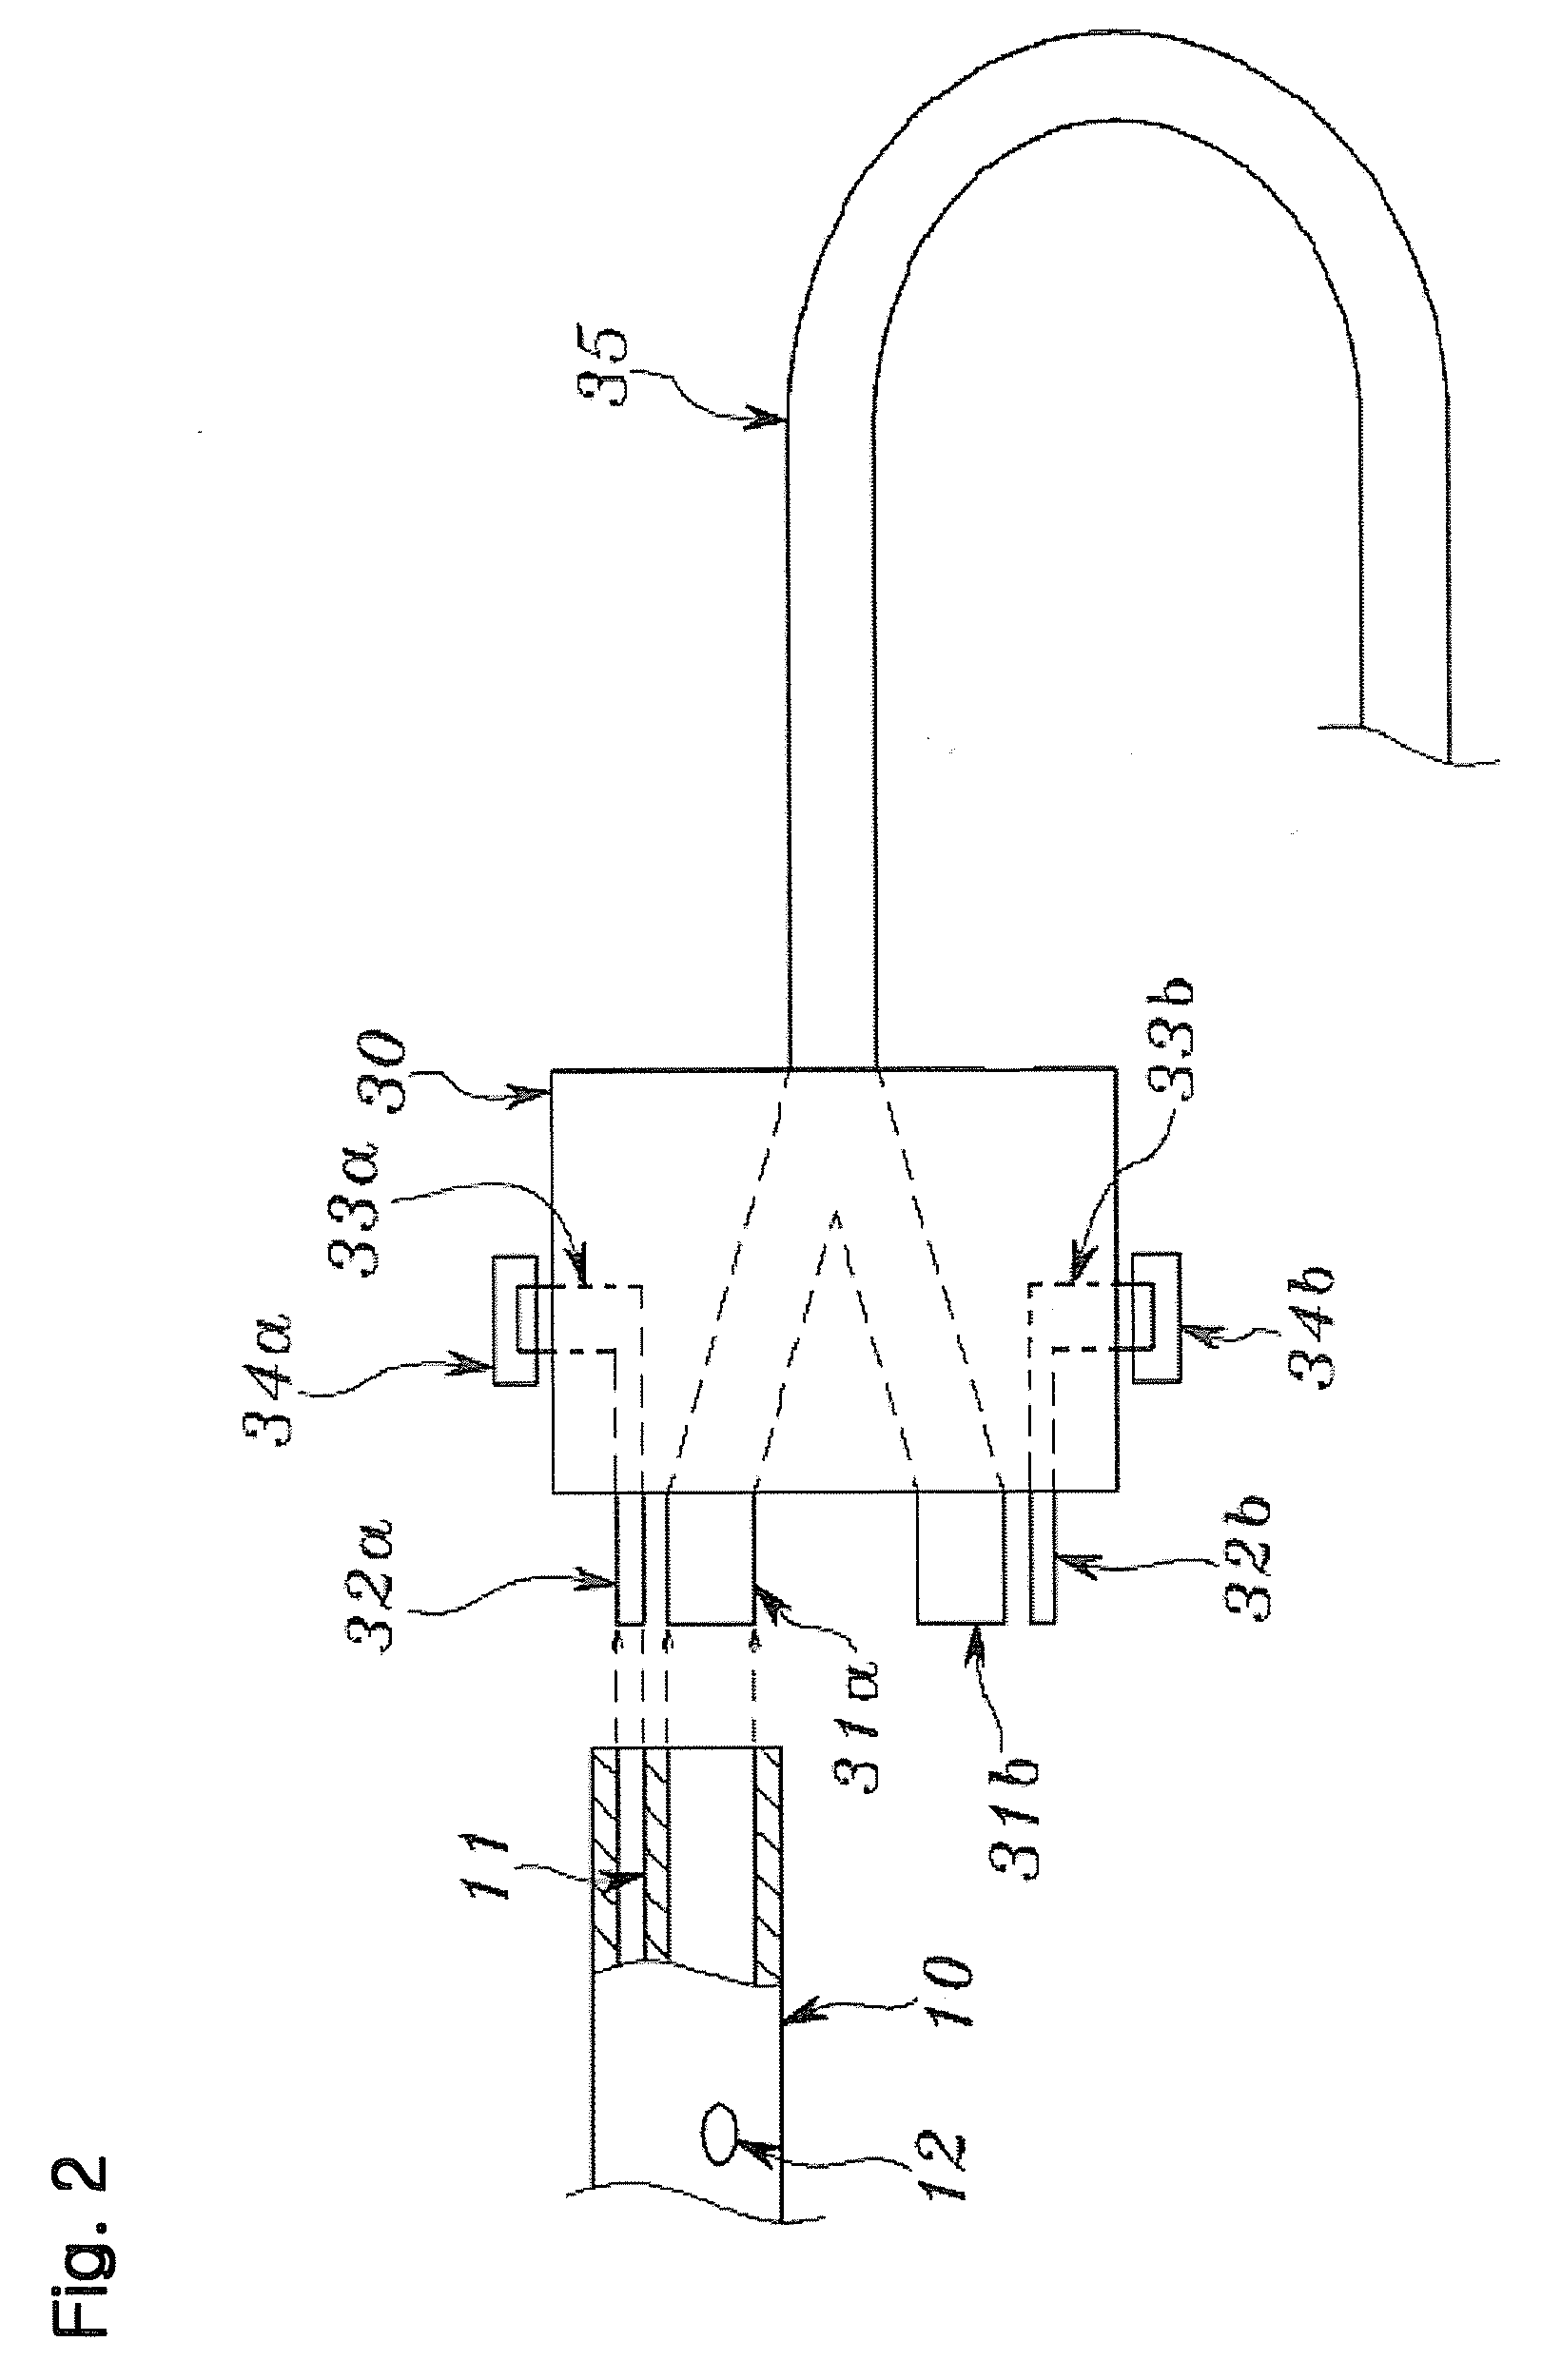 Closed Suction Drainage Apparatus With Drainage Tube Having Anti-Clogging and Irrigating Functions